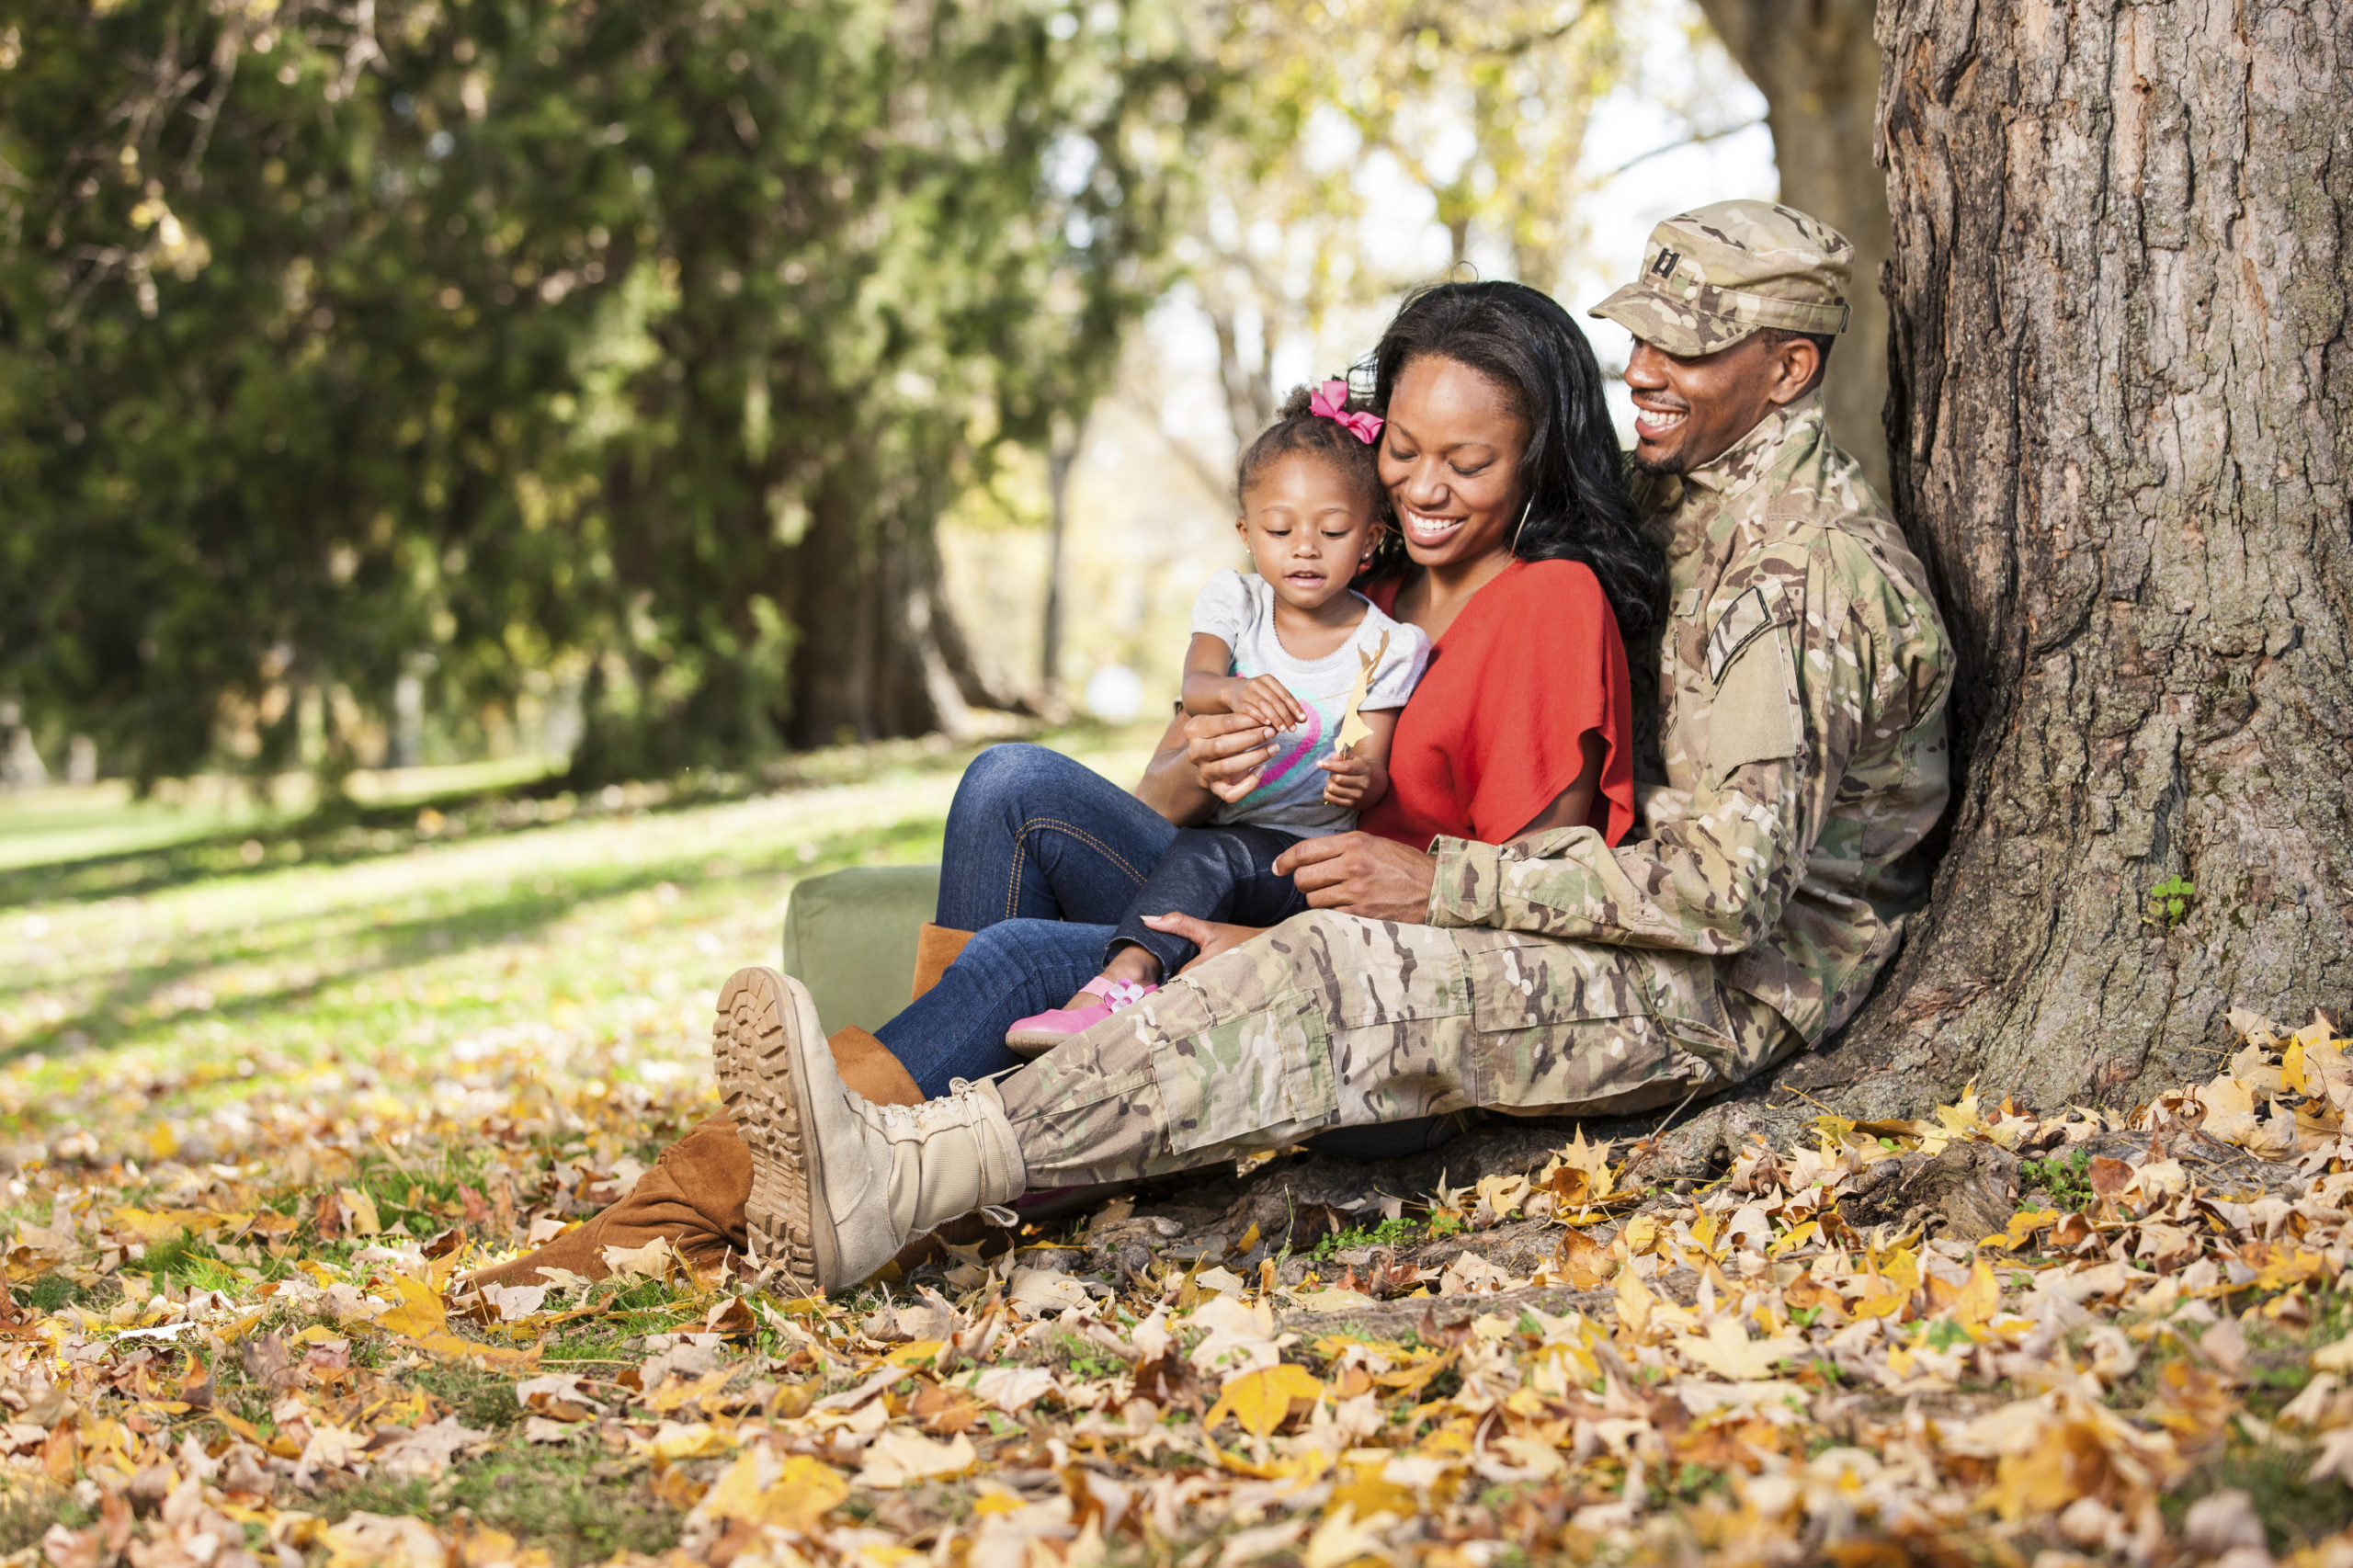 We’re discussing Memorial Day and fertility care for veterans